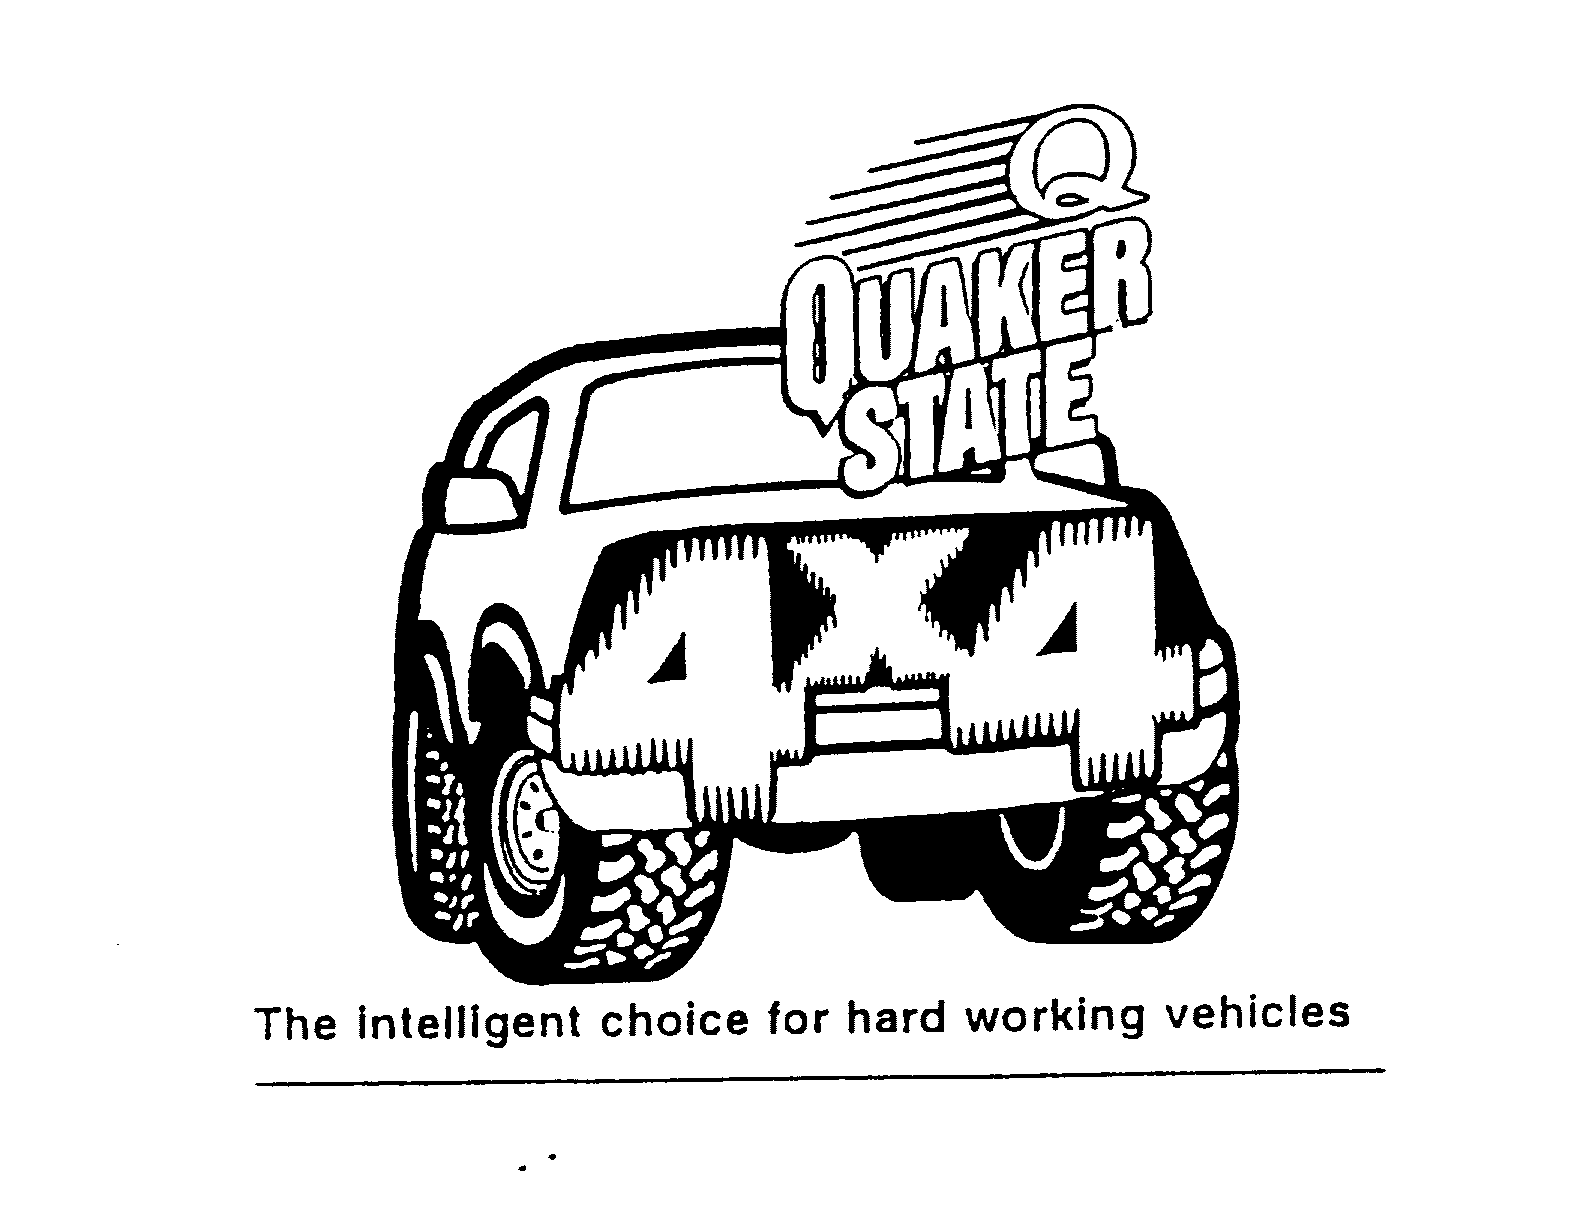  Q QUAKER STATE 4X4 THE INTELLIGENT CHOICE FOR HARD WORKING VEHICLES